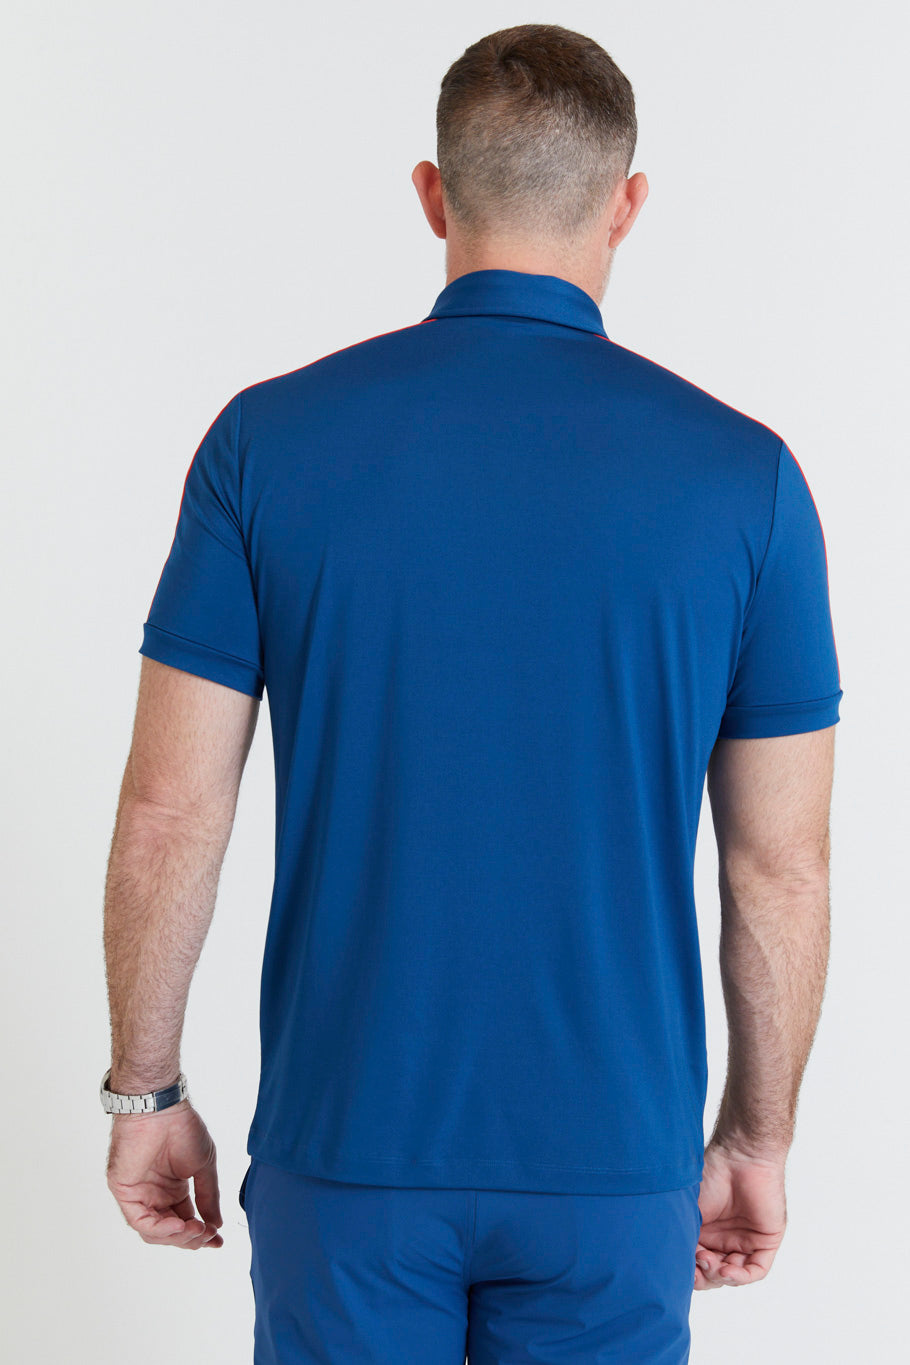 Image of the evans polo in admiral